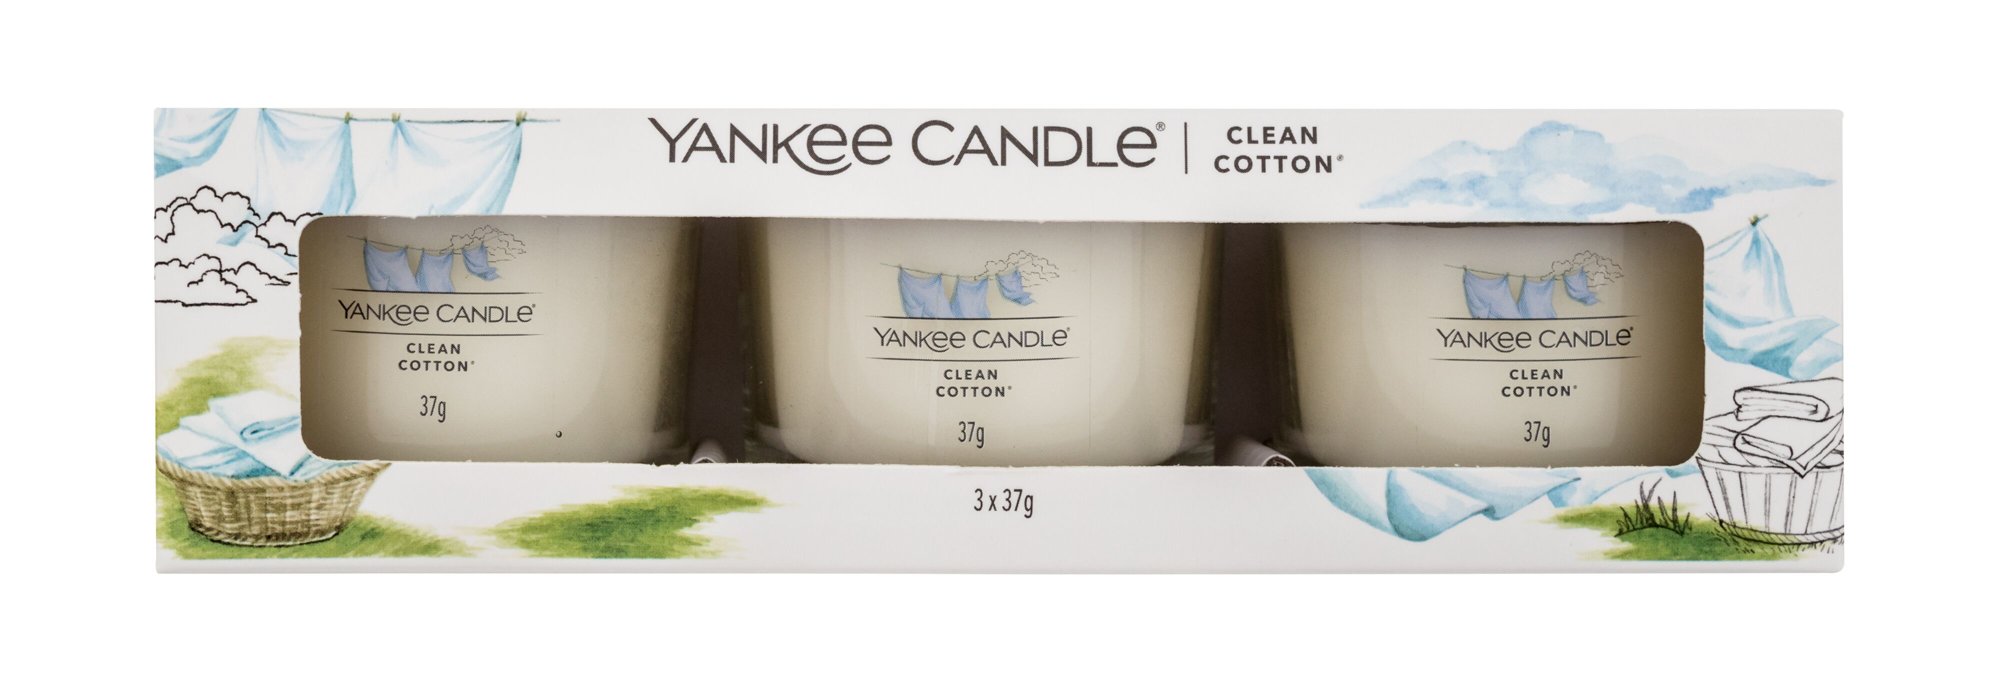 Yankee Candle Clean Cotton 37g Scented Candle 3 x 37 g Kvepalai Unisex Scented Candle Rinkinys (Pažeista pakuotė)